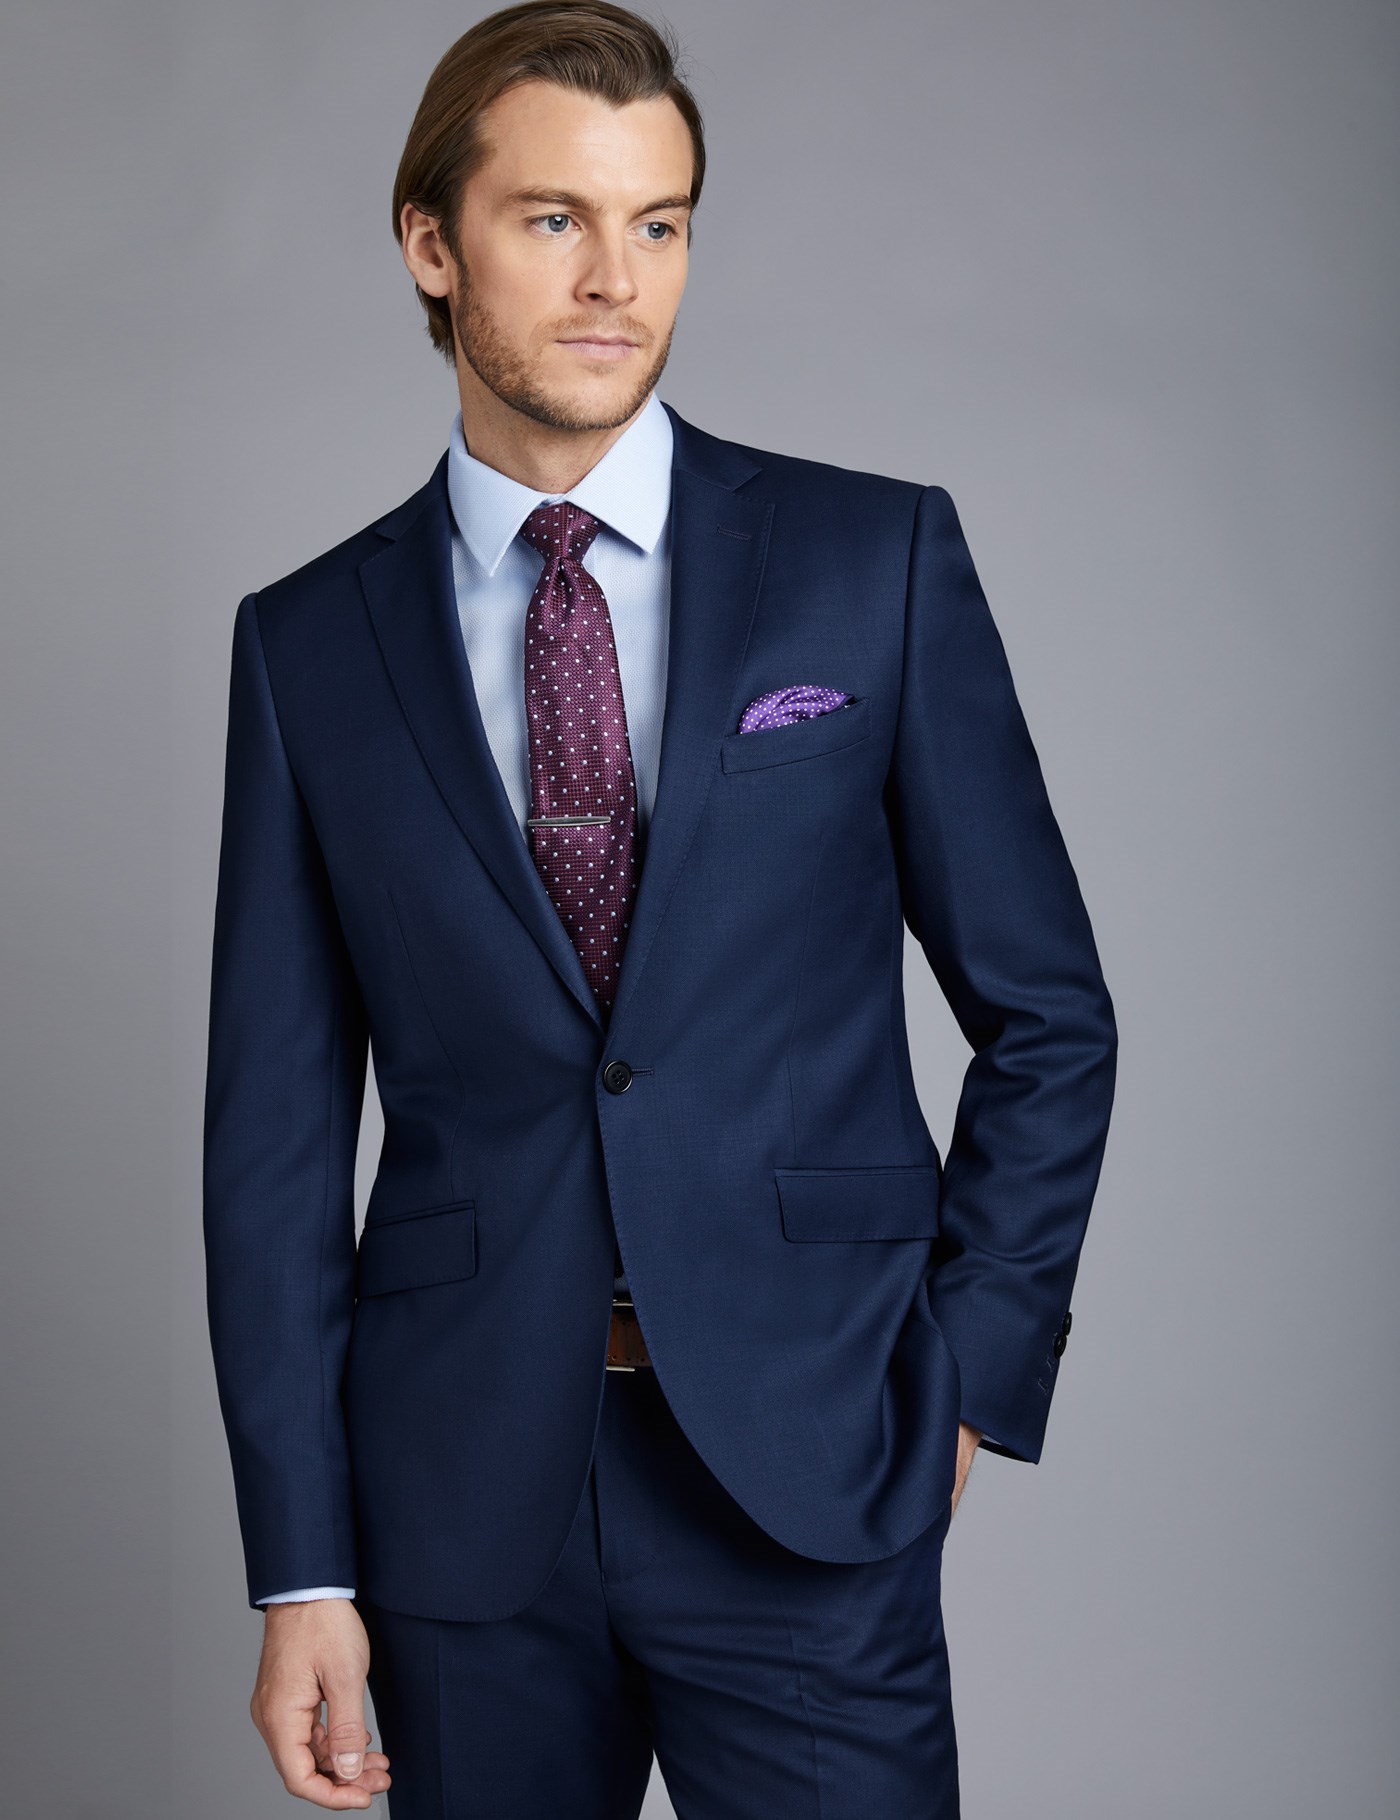 Men's Royal Blue Plain Twill Extra Slim Fit Suit Jacket | Hawes and Curtis